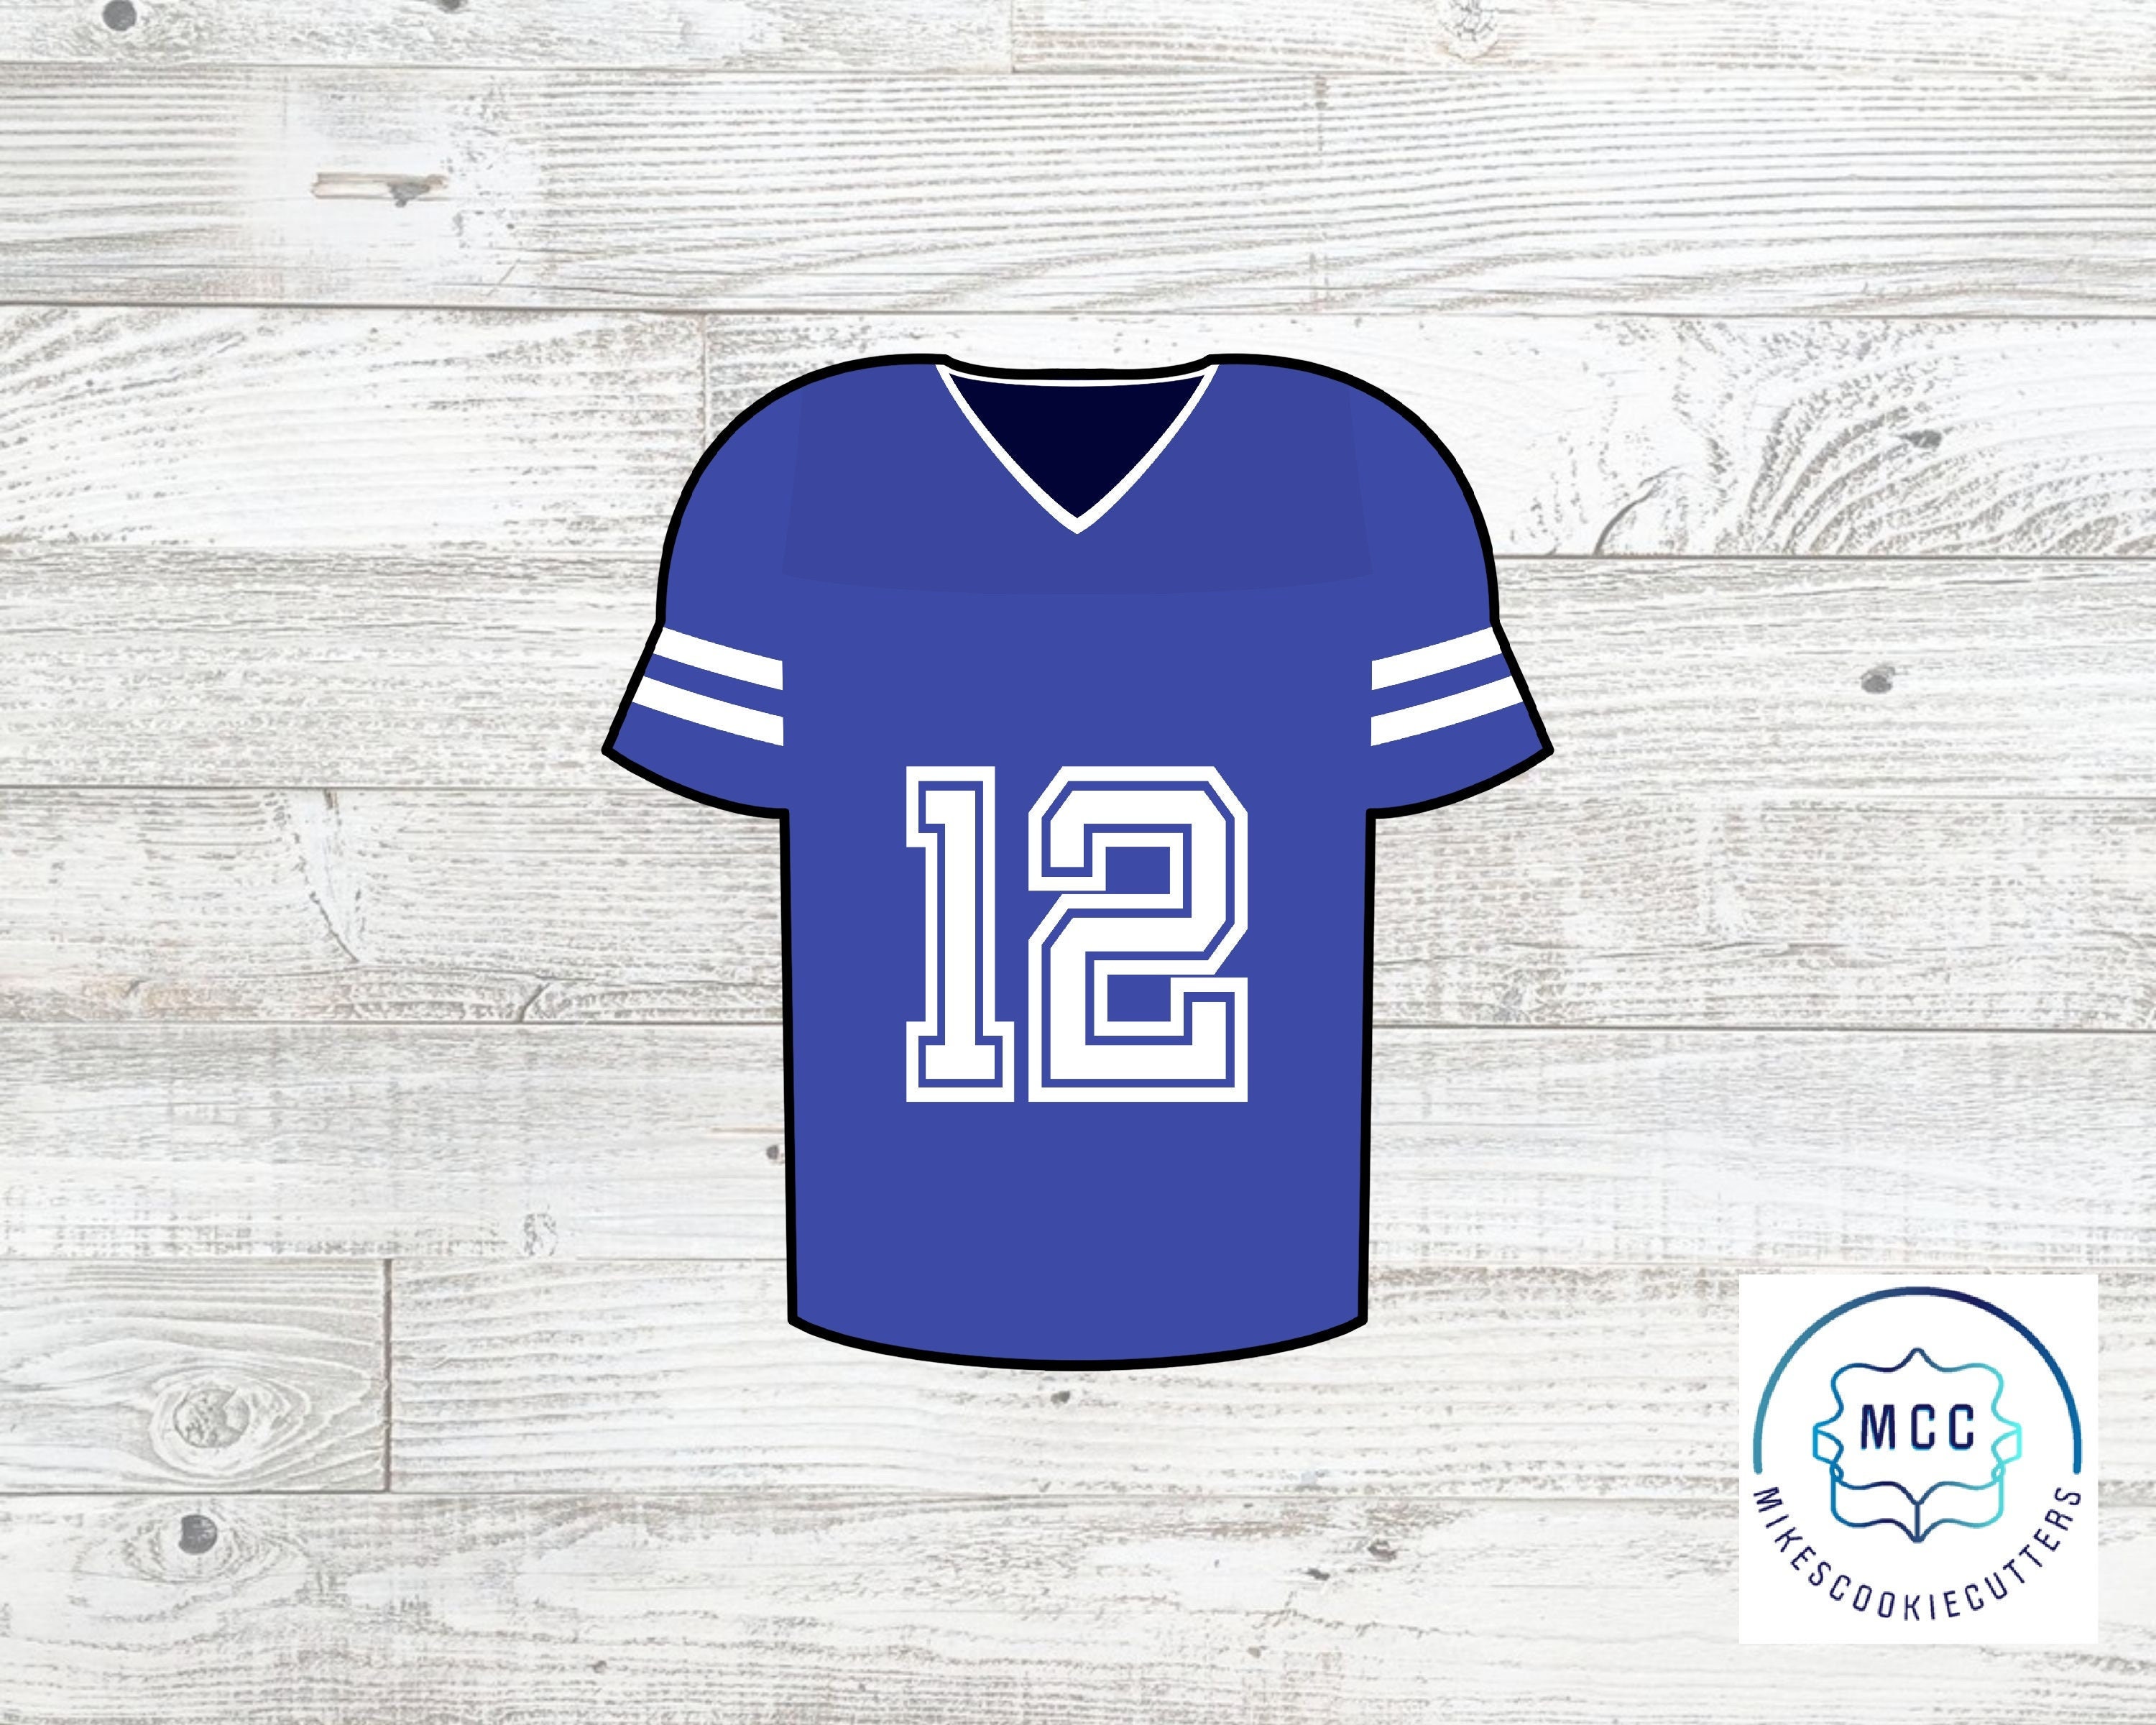 Blue Football Jersey Clipart Hd PNG, Yellow White Blue Stripe